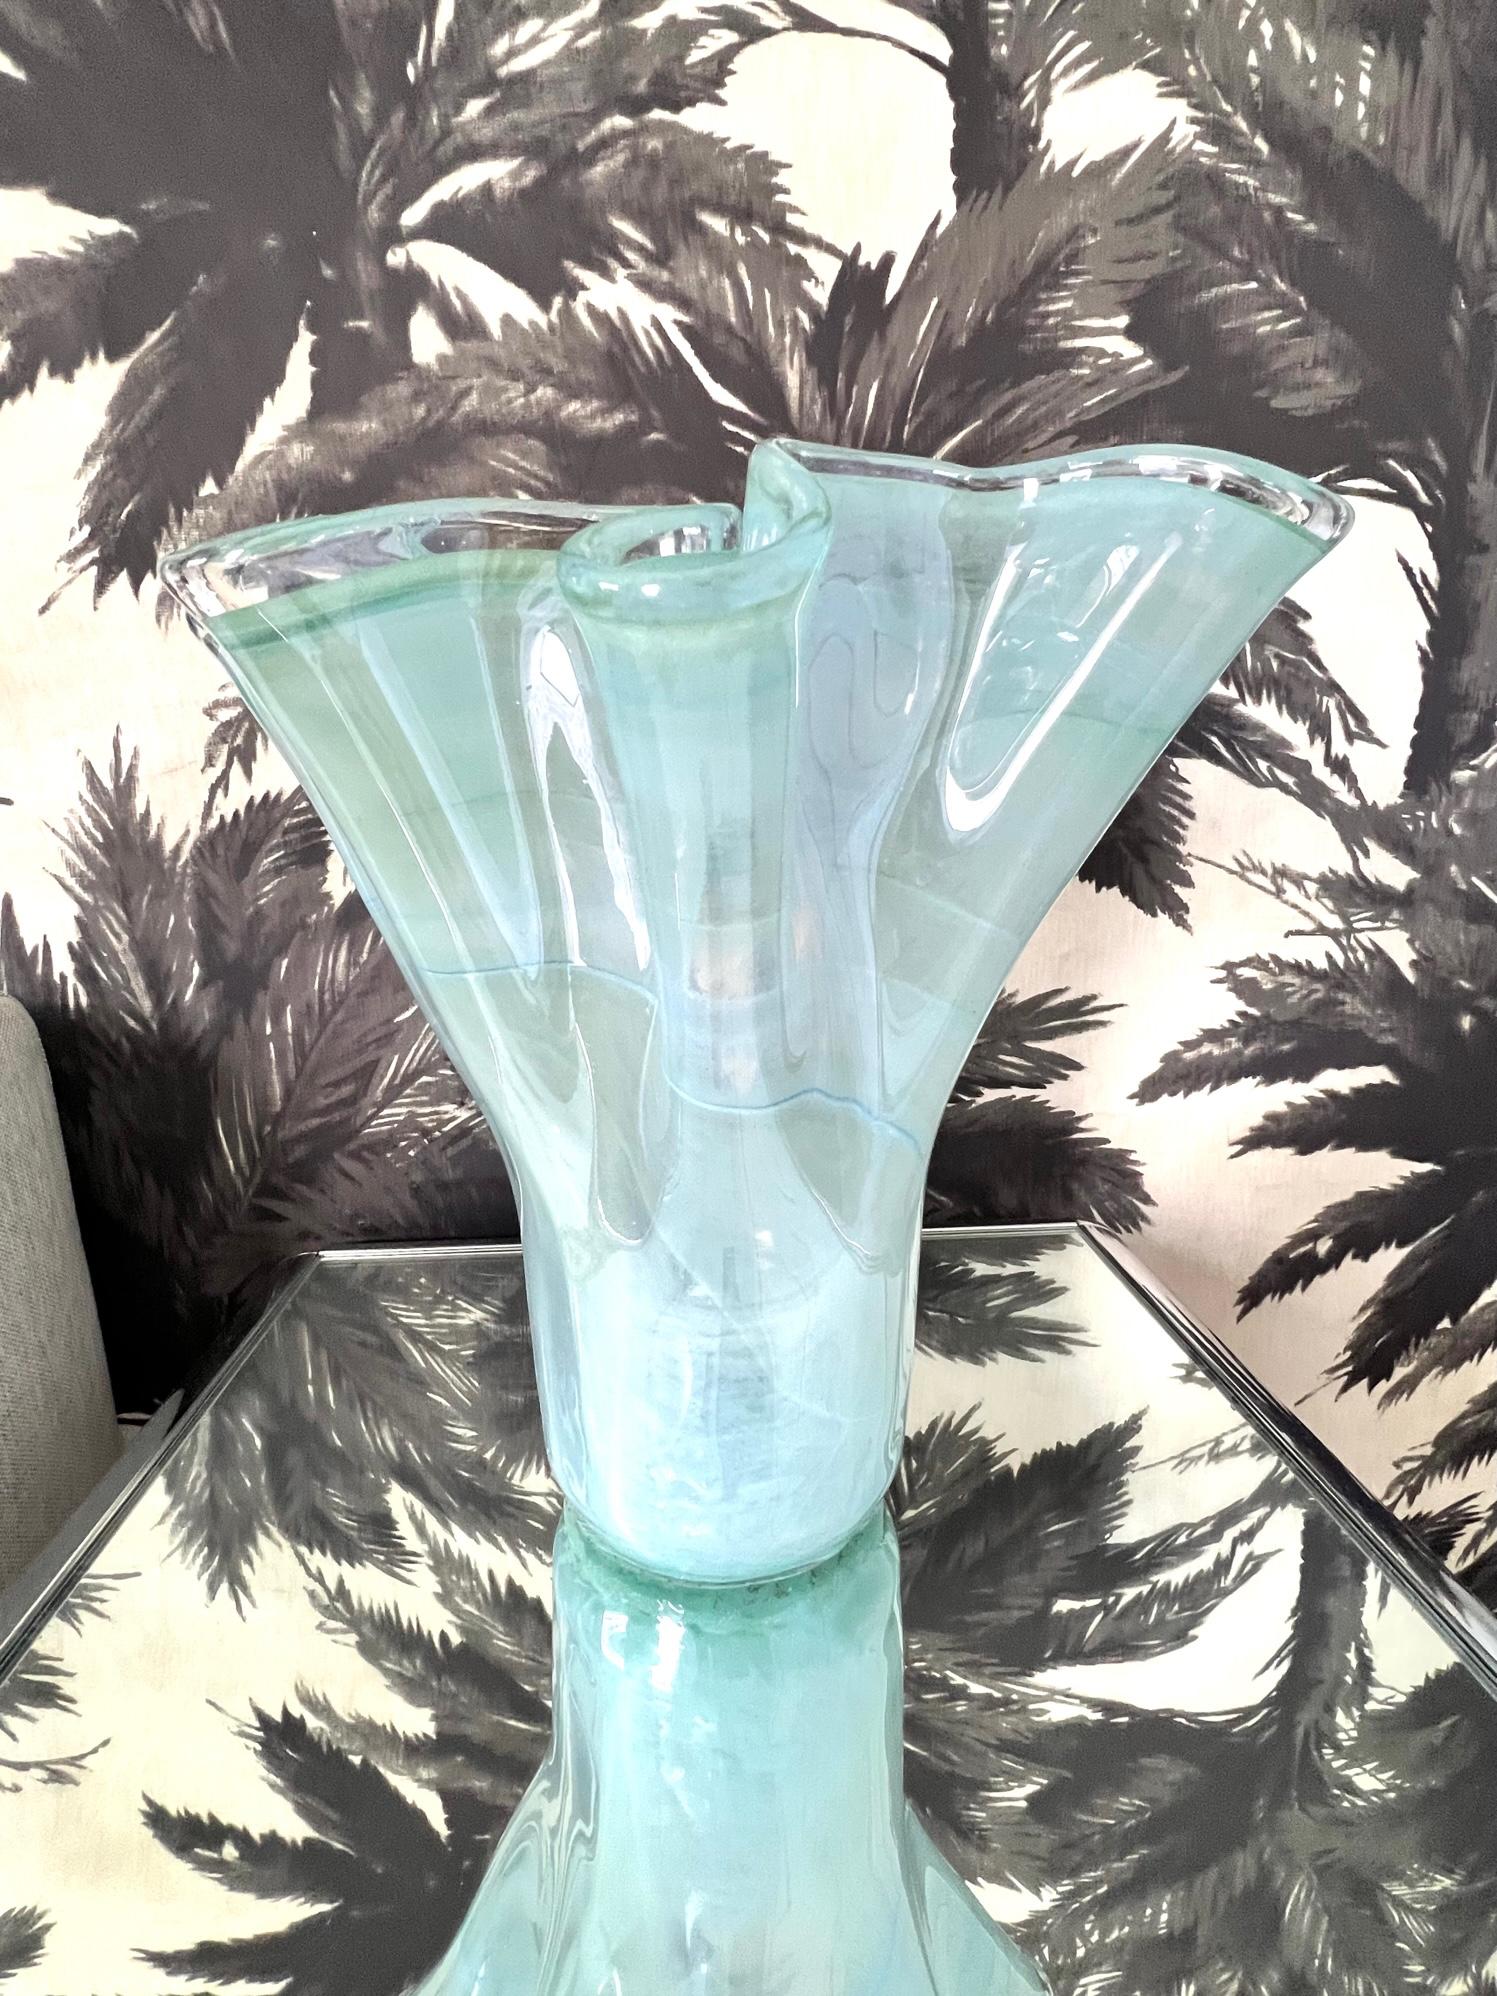 Late 20th Century Vintage Murano Glass Vase in Celadon & Turquoise with Fazzoletto Design, c. 1980